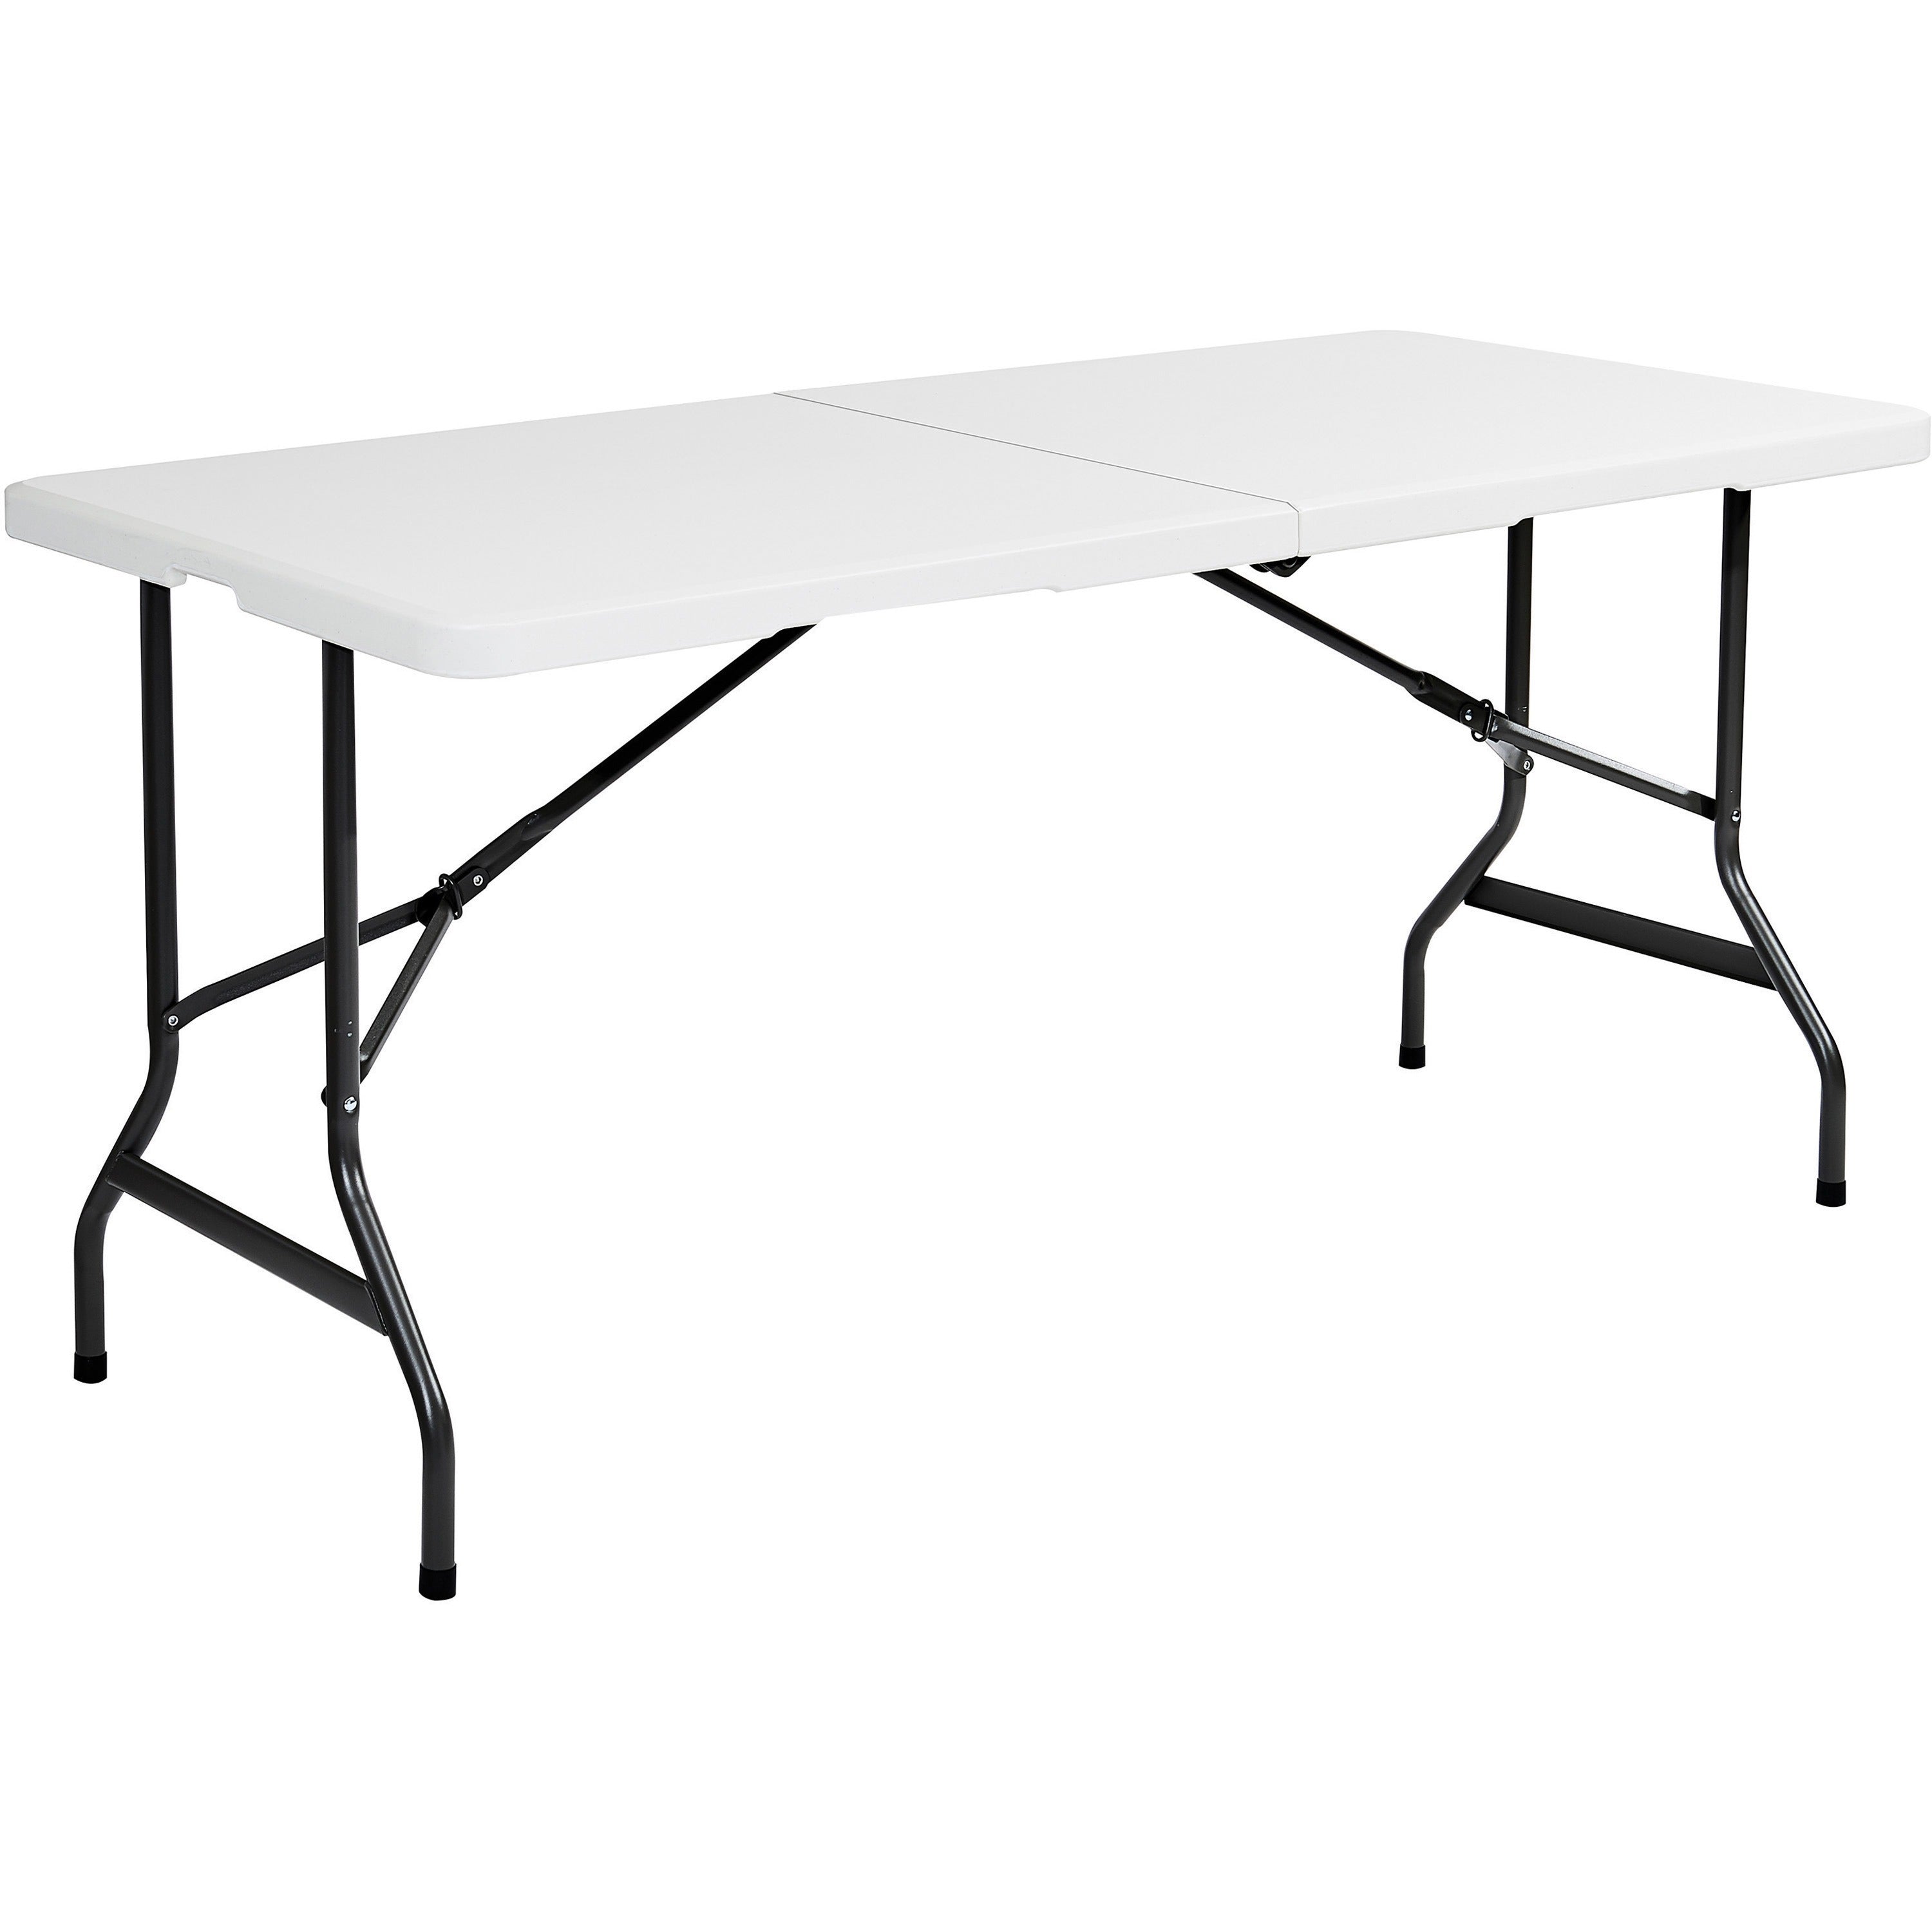 Iceberg IndestrucTable TOO Bifold Table - For - Table TopRectangle Top - Adjustable Height - 96" Table Top Length x 30" Table Top Width x 2" Table Top Thickness - 29" Height - Platinum, Powder Coated - Tubular Steel - 1 Each - 